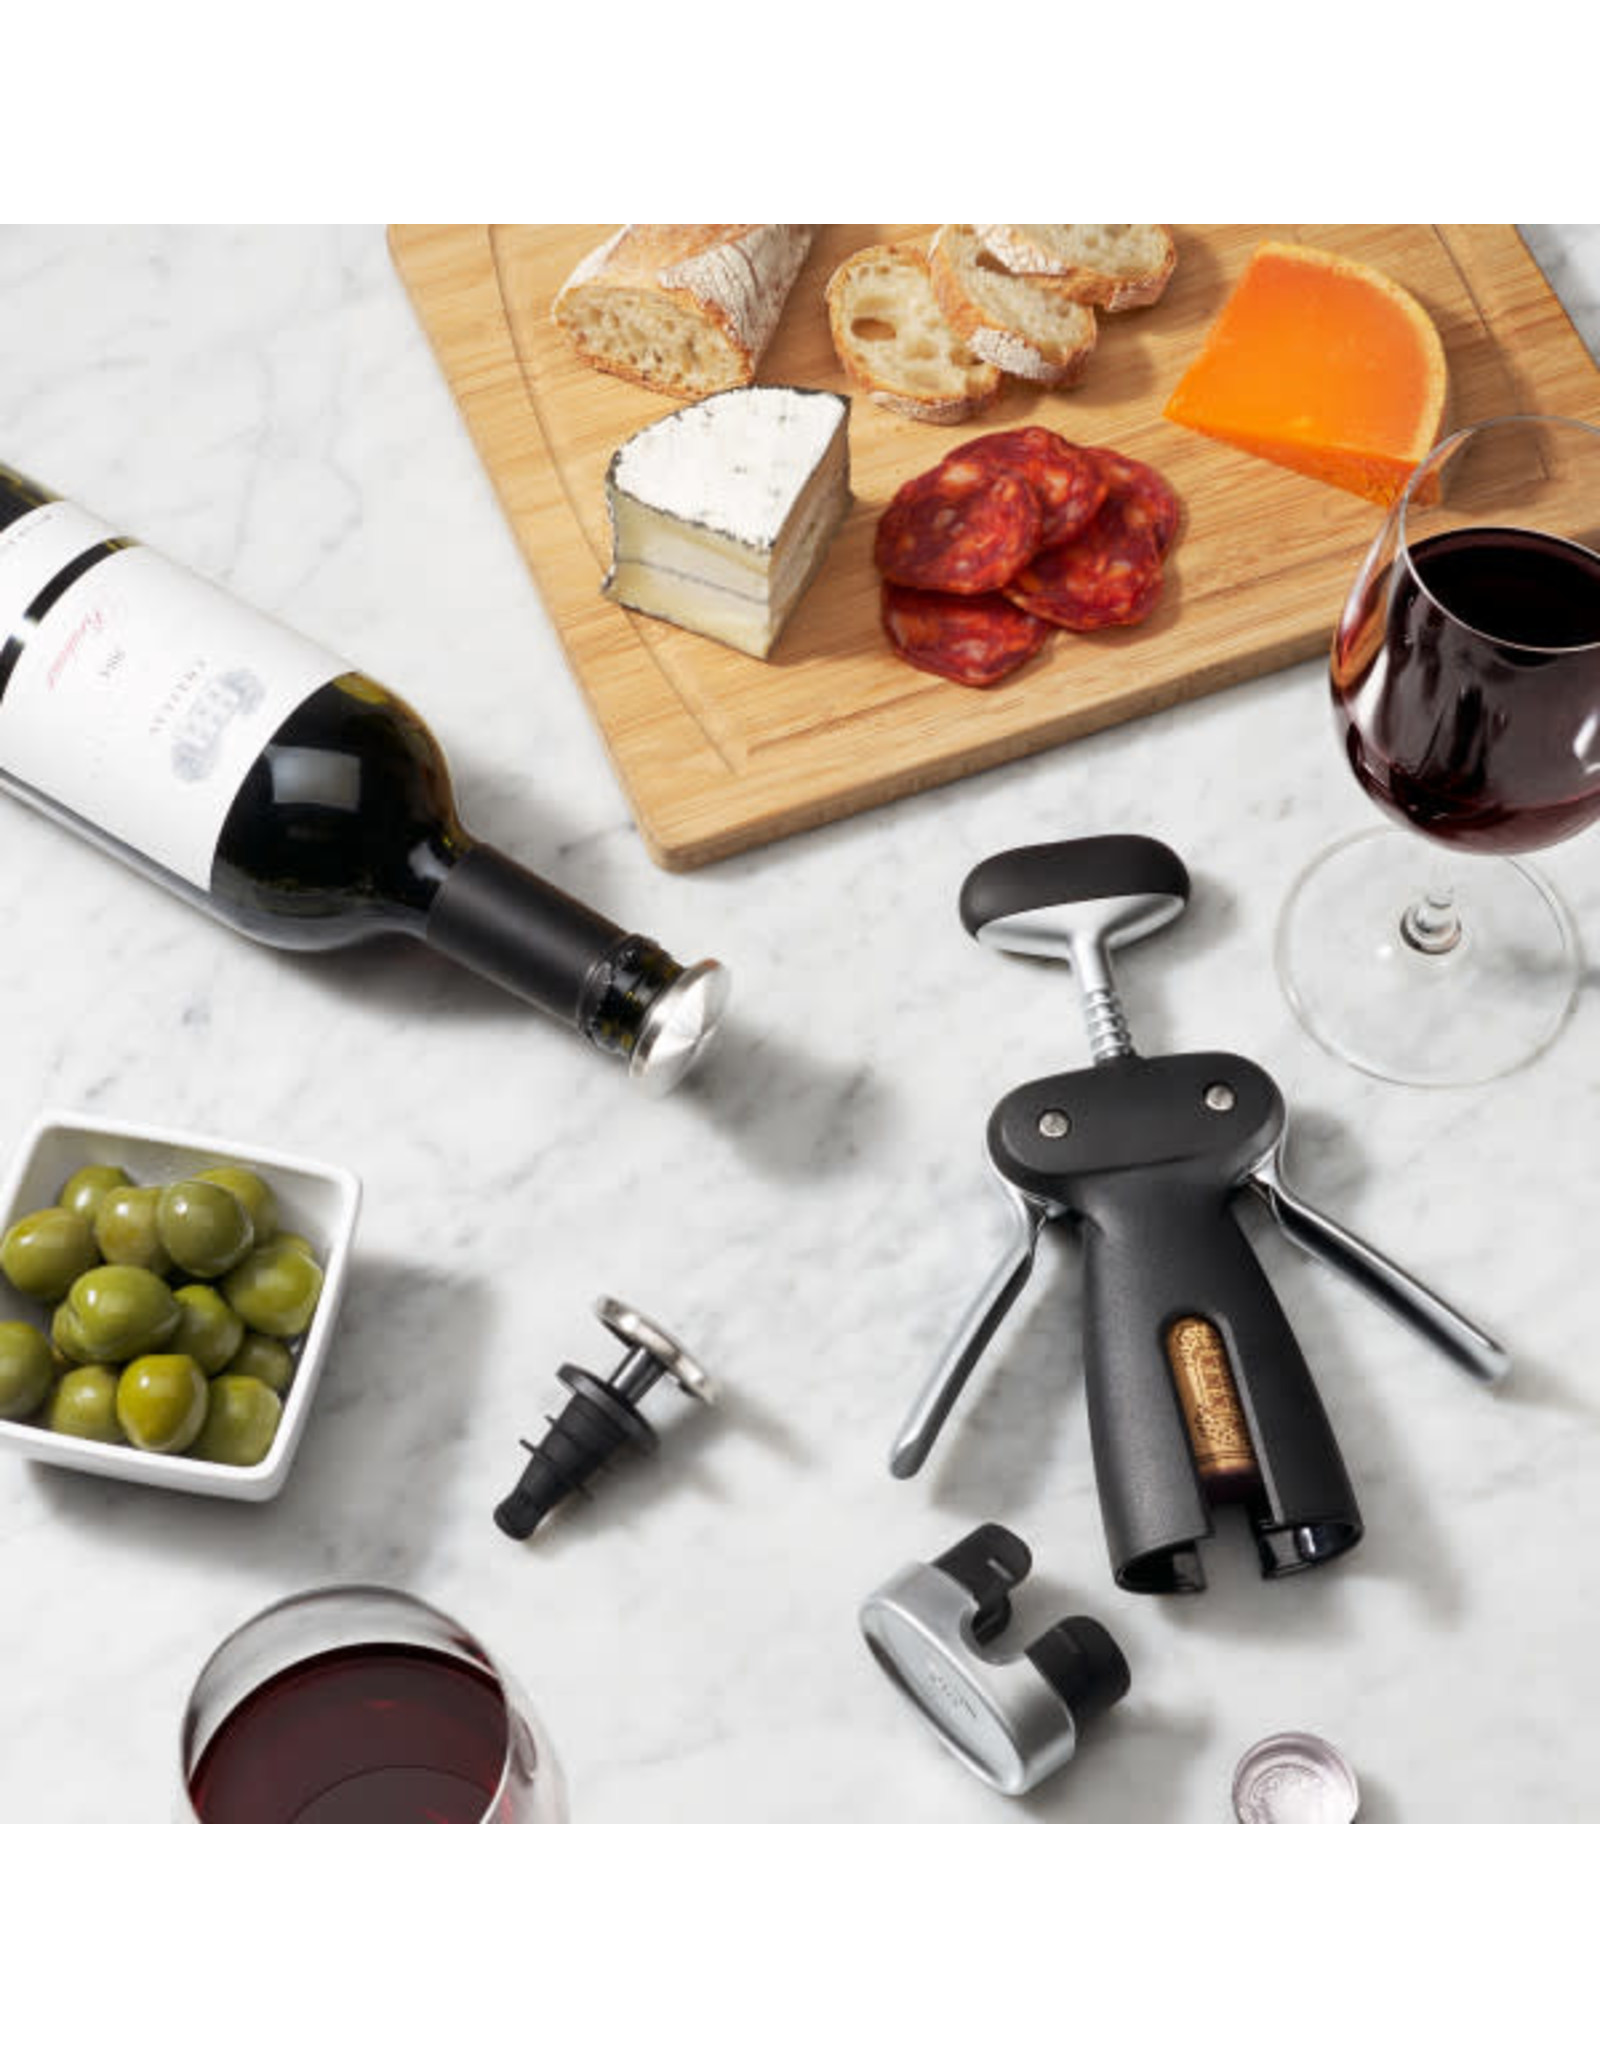 Steel Winged Corkscrew With Removable Foil Cutter